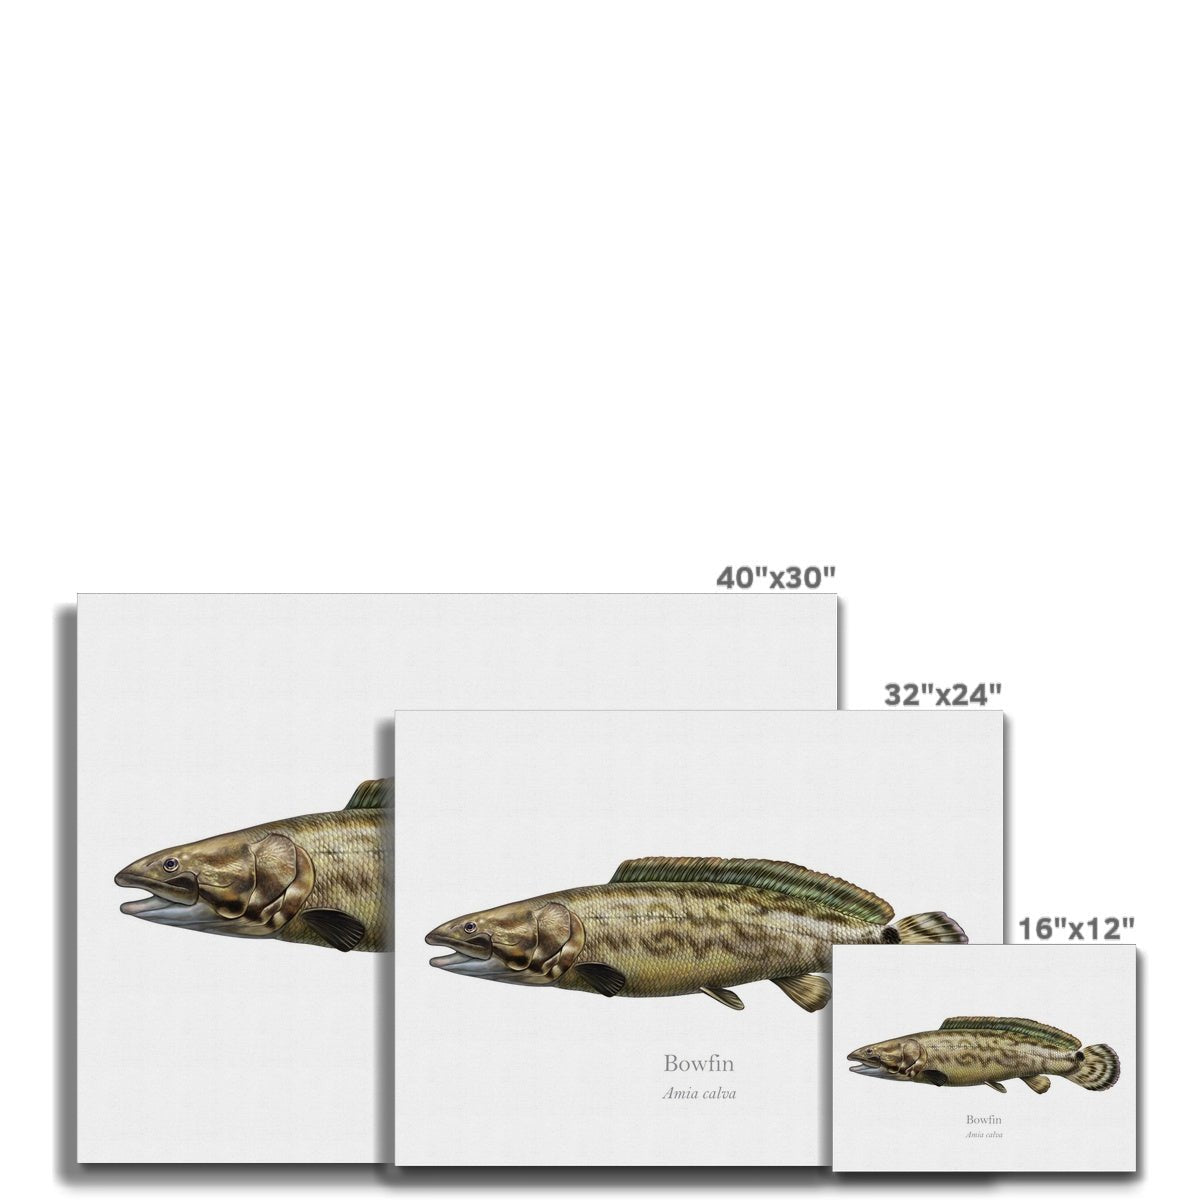 Bowfin - Canvas Print - With Scientific Name - madfishlab.com